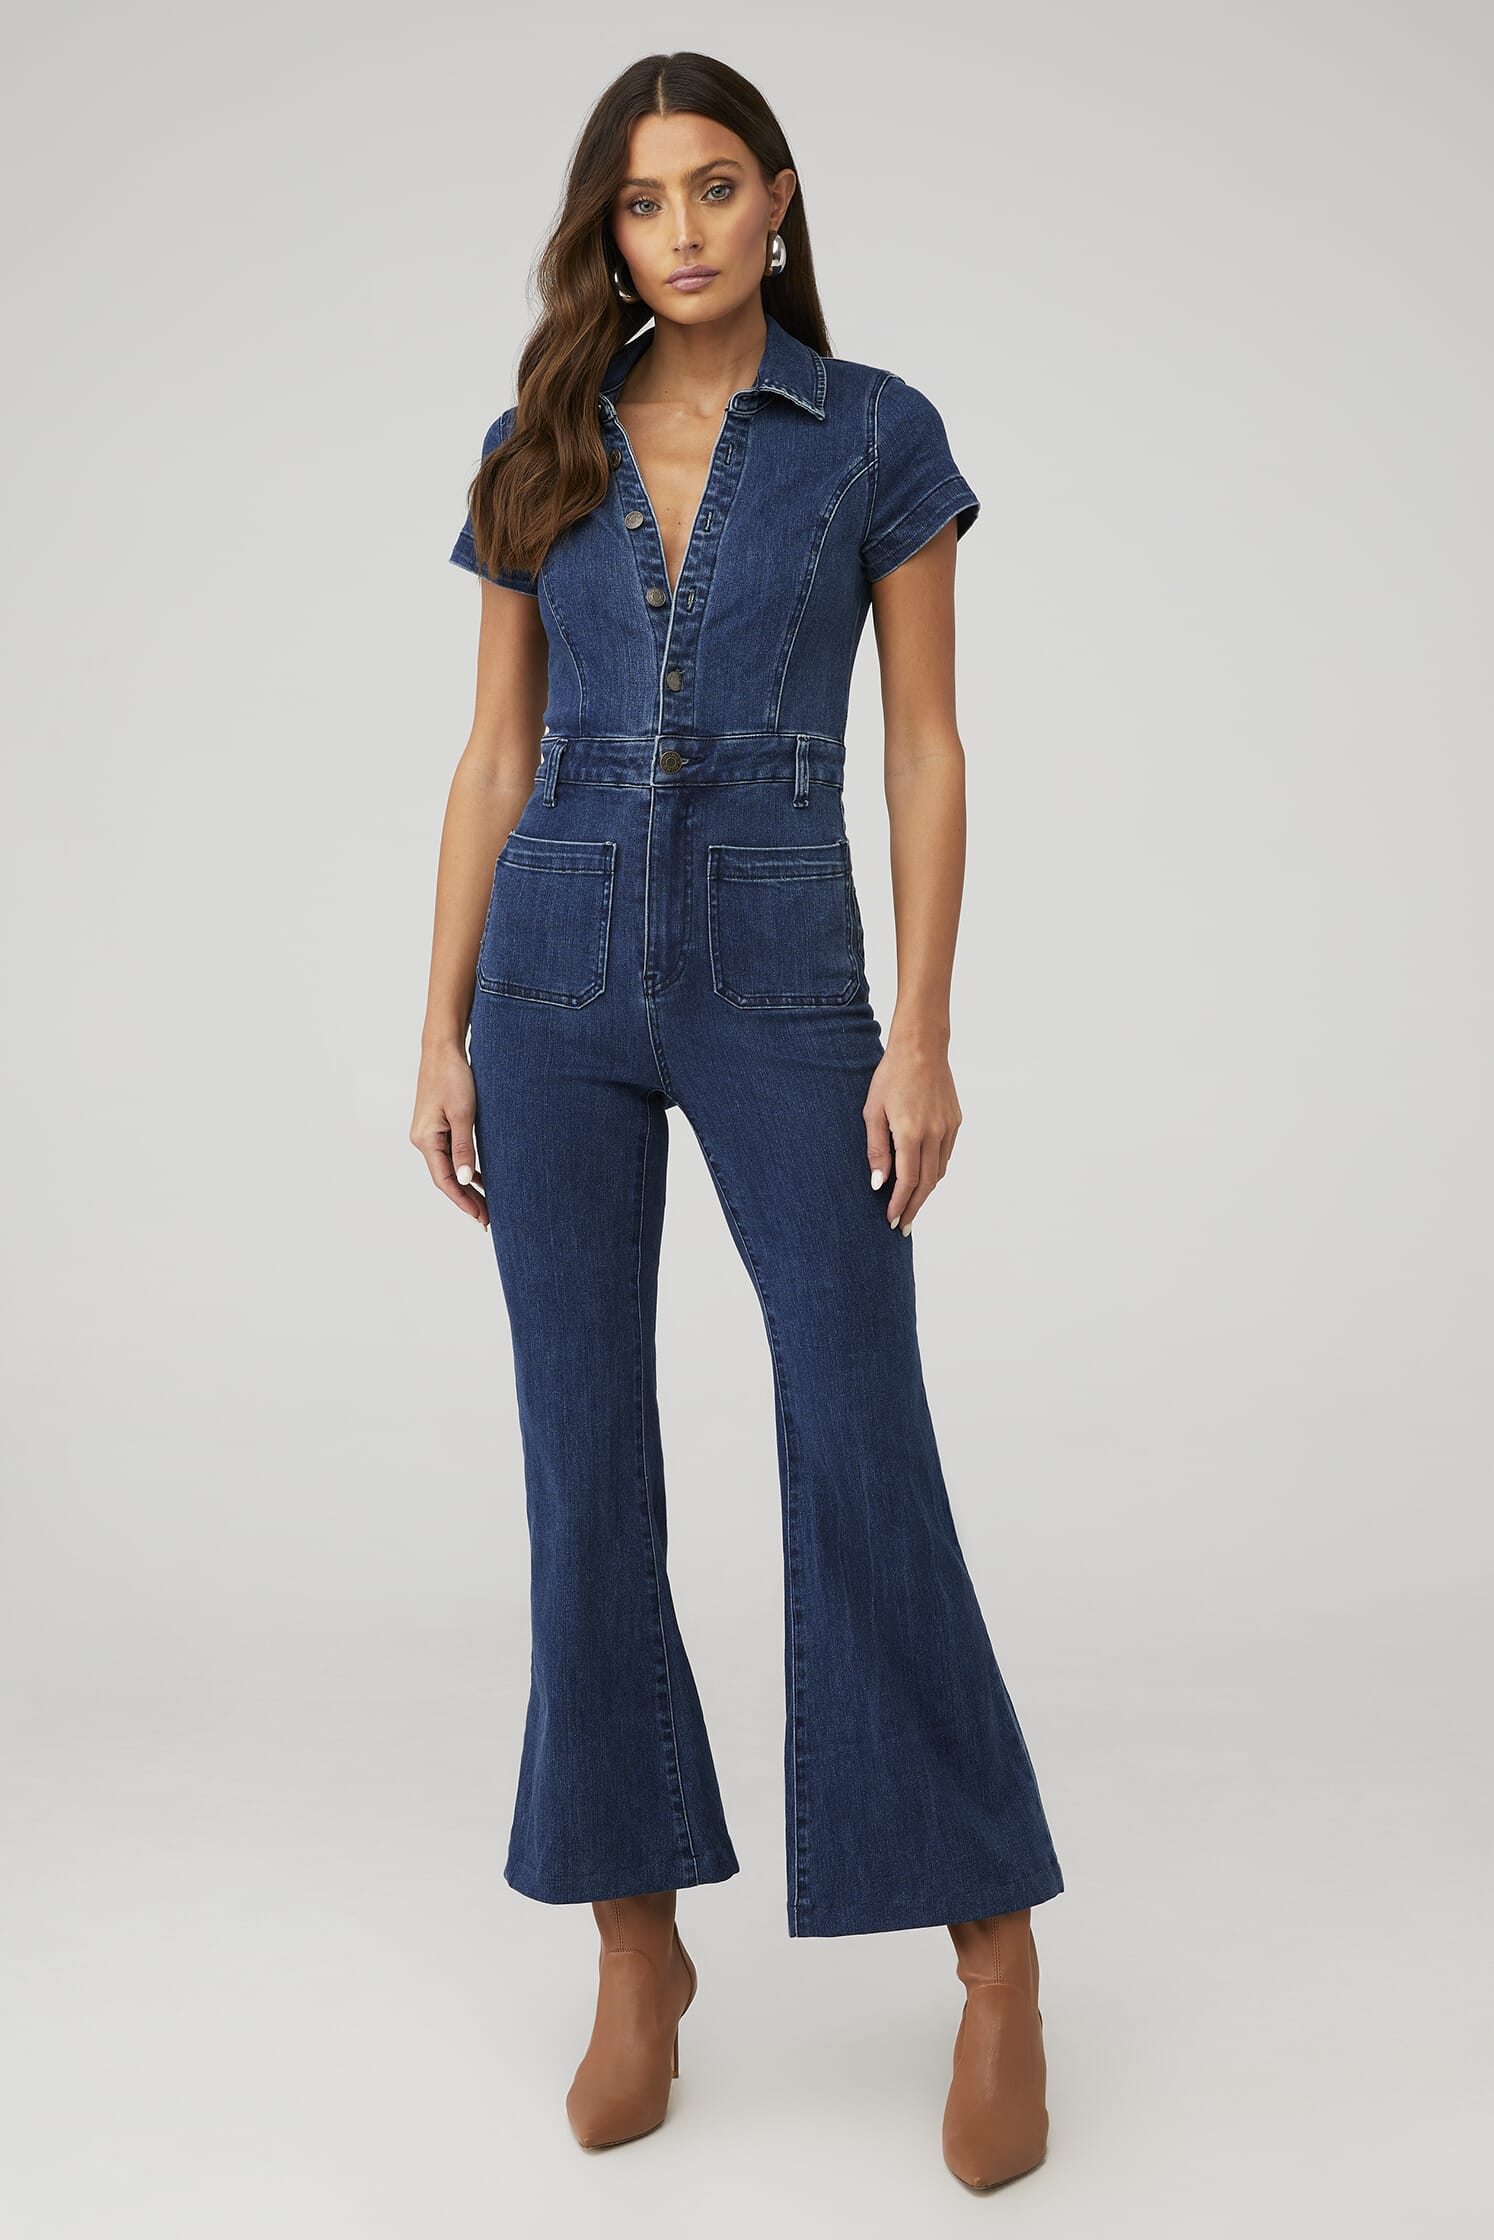 Cropped Everhart Jumpsuit ~ Pearly White – Show Me Your Mumu